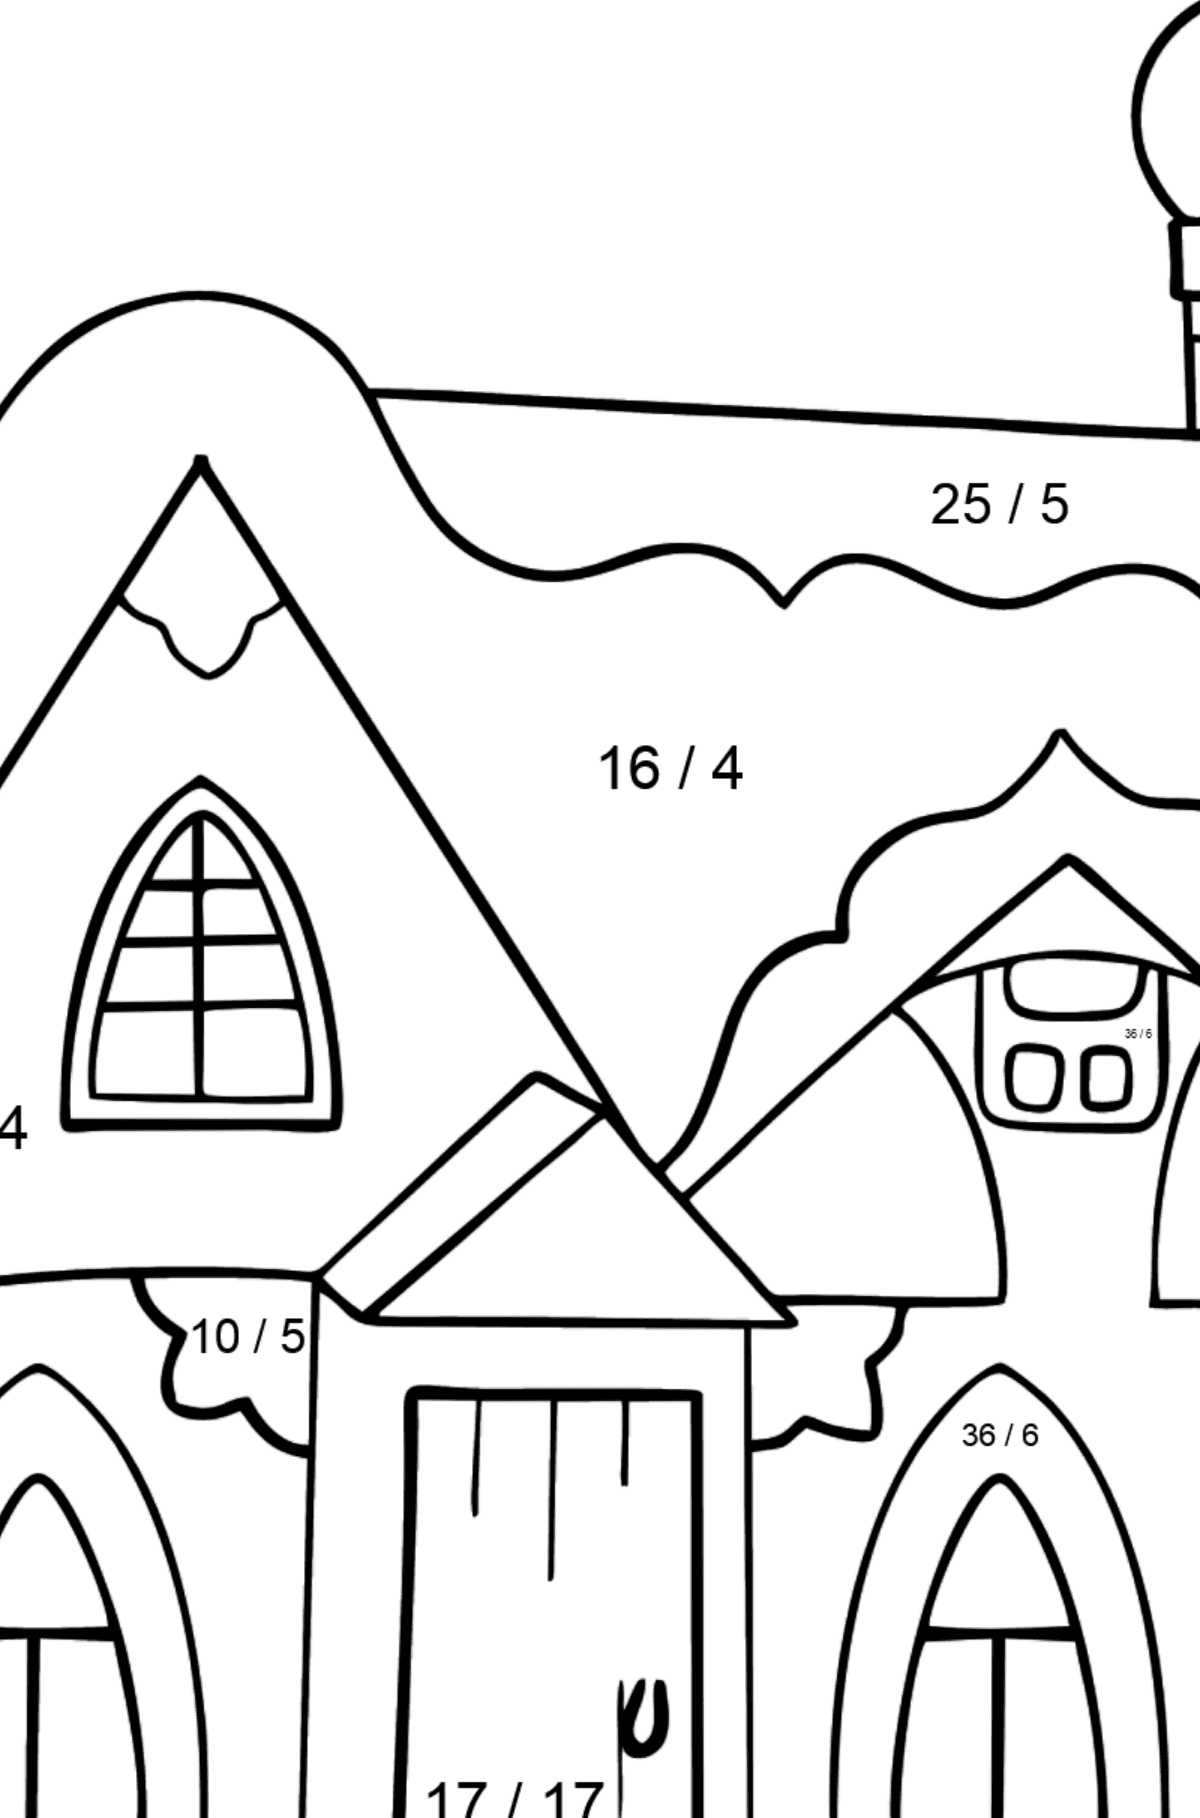 Simple Coloring Page - A Fairytale House - Math Coloring - Division for Kids